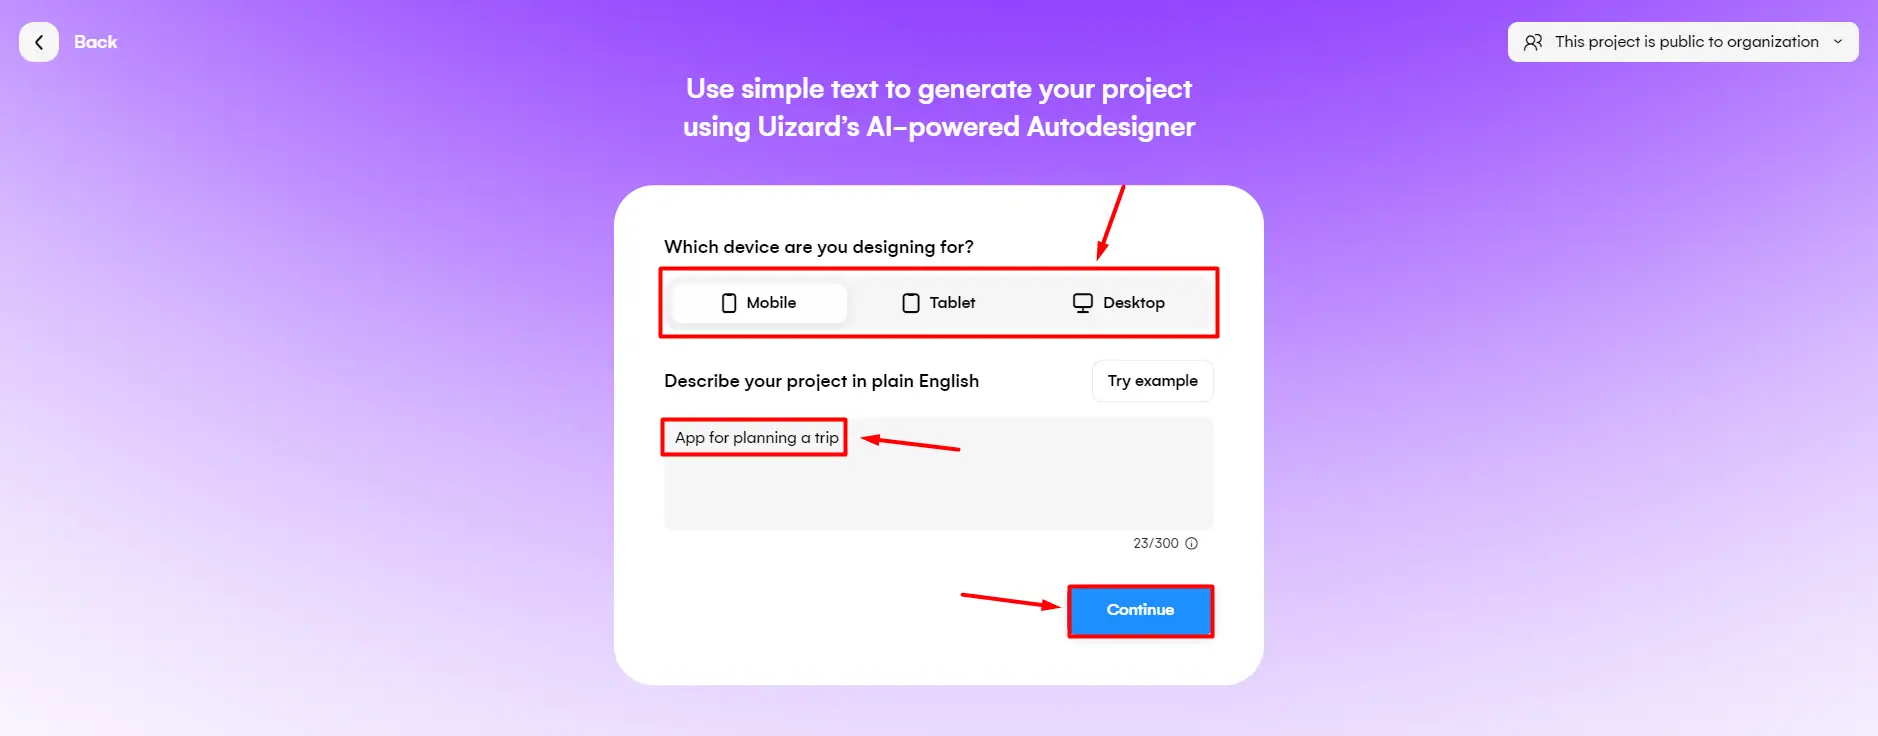 Uizard tutorial device and prompt